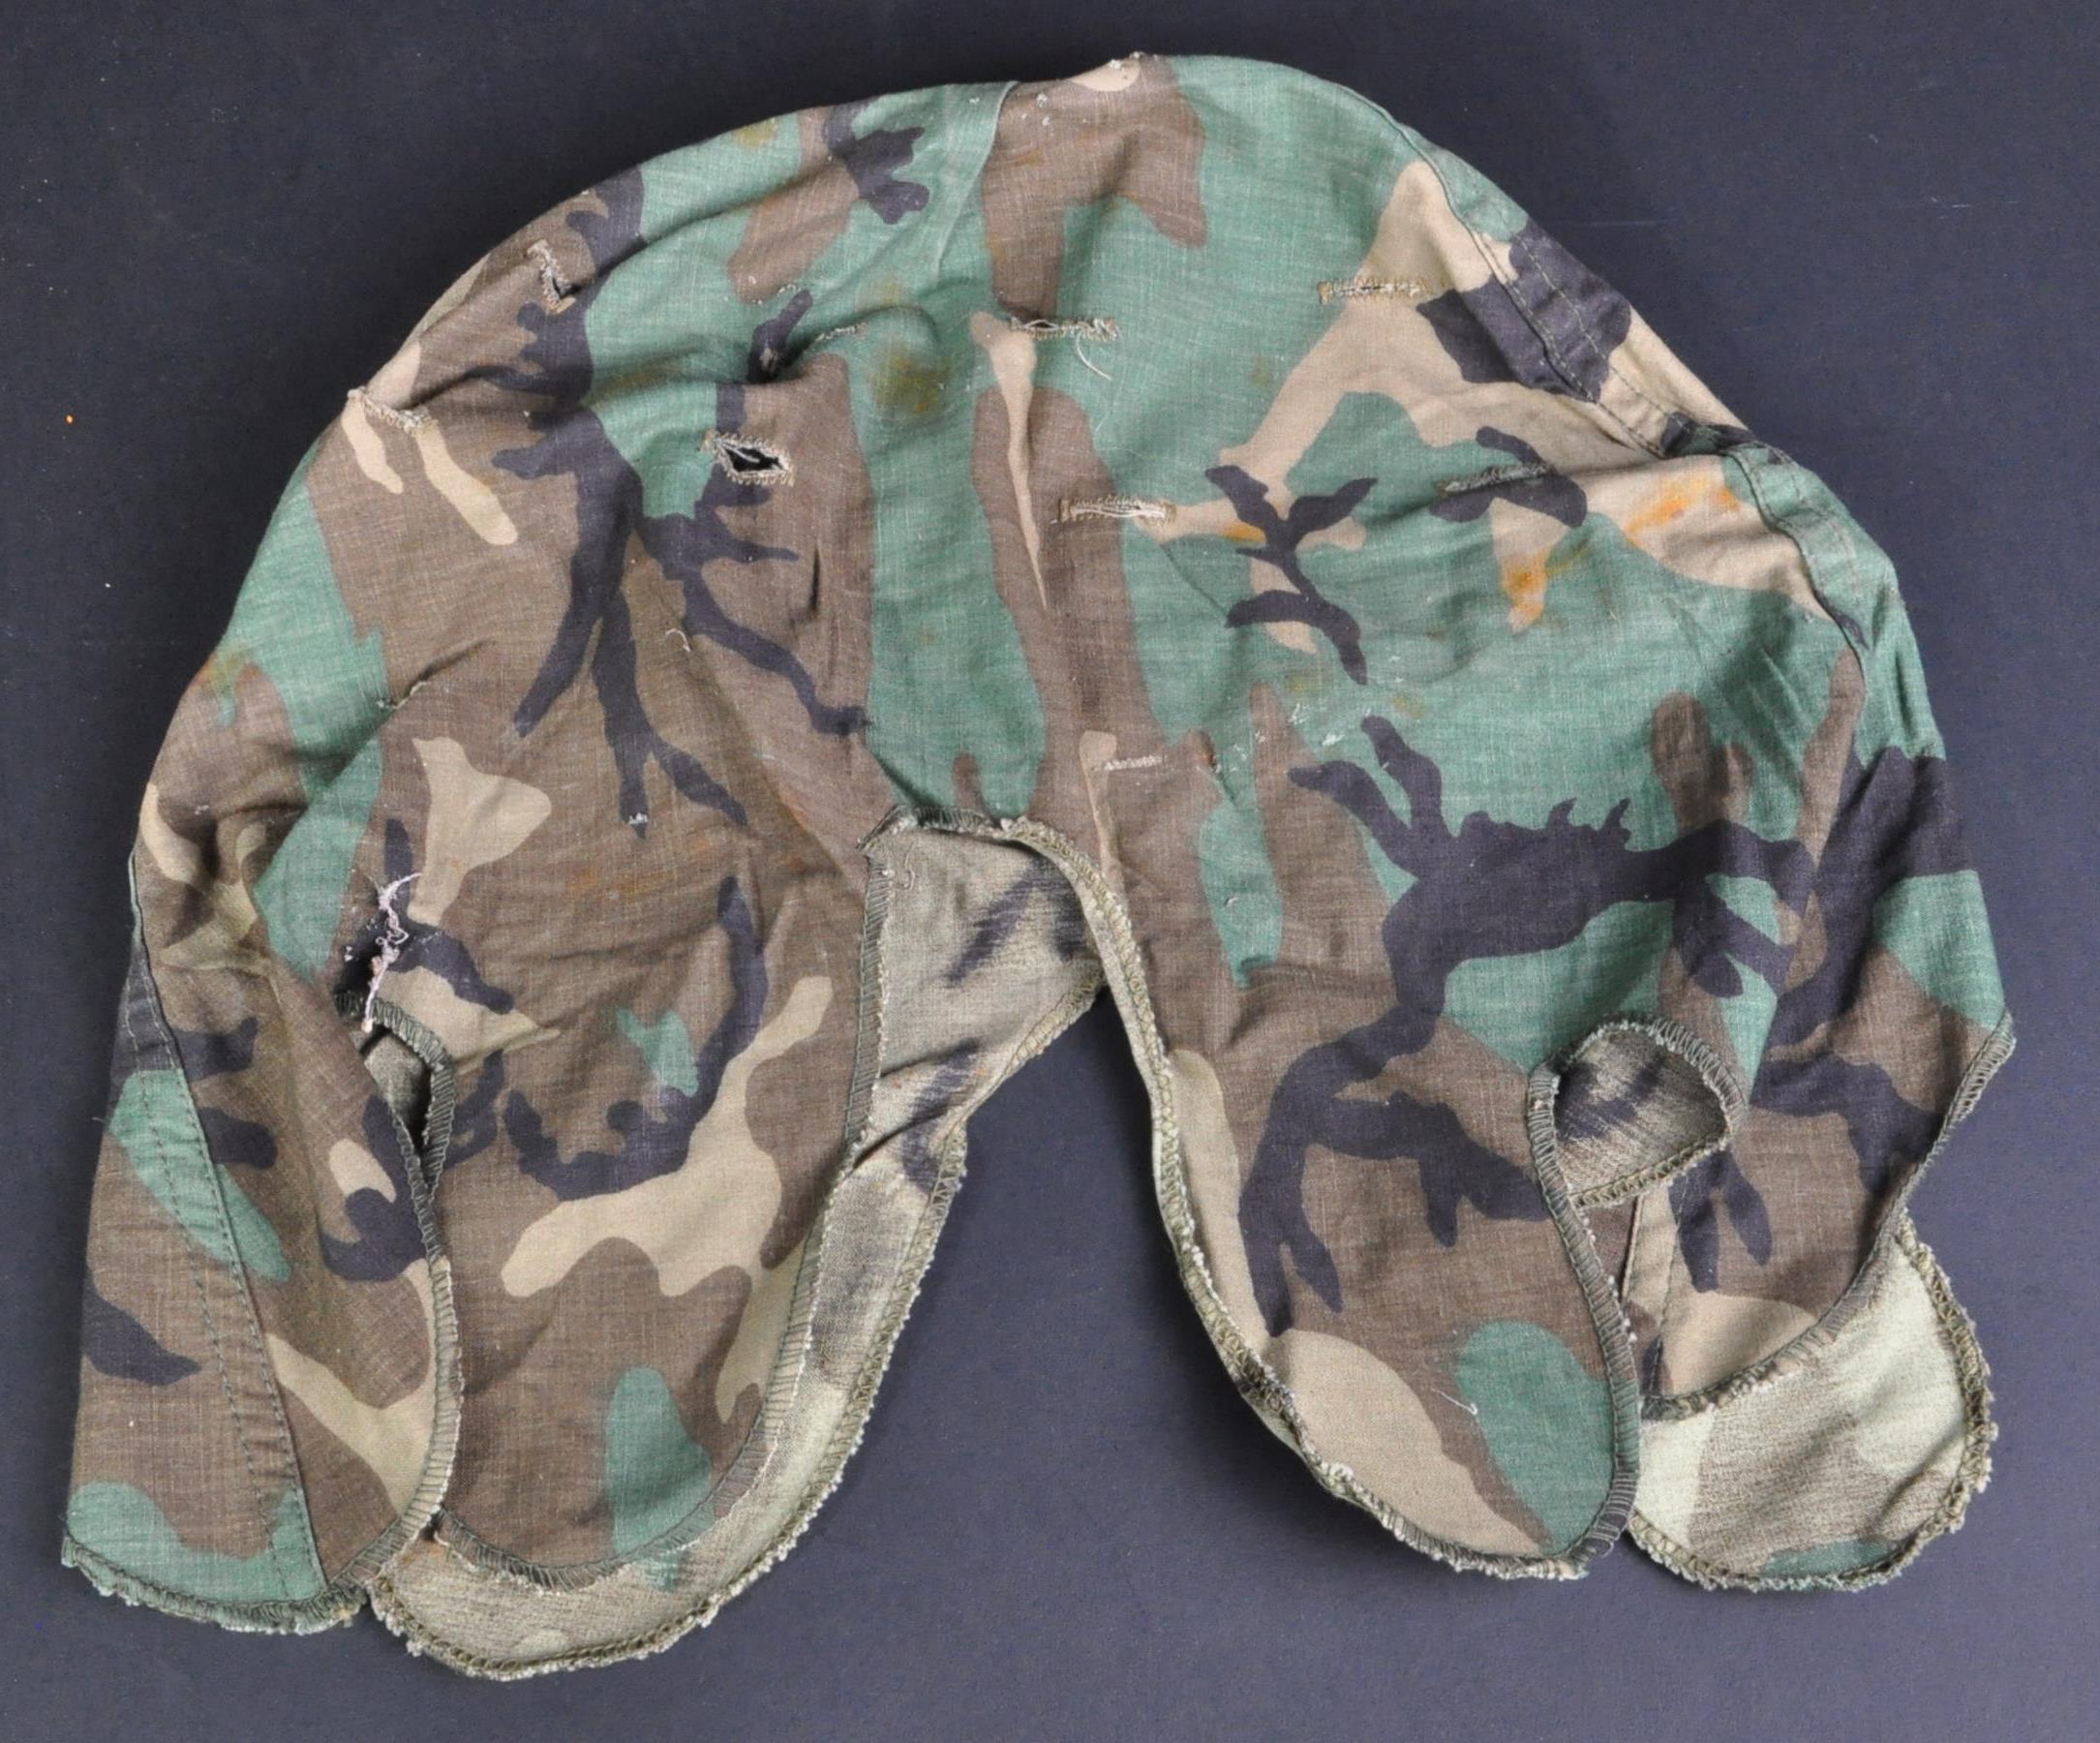 COLLECTION OF FOUR 20TH CENTURY CAMOUFLAGE HELMET COVERS - Image 6 of 6